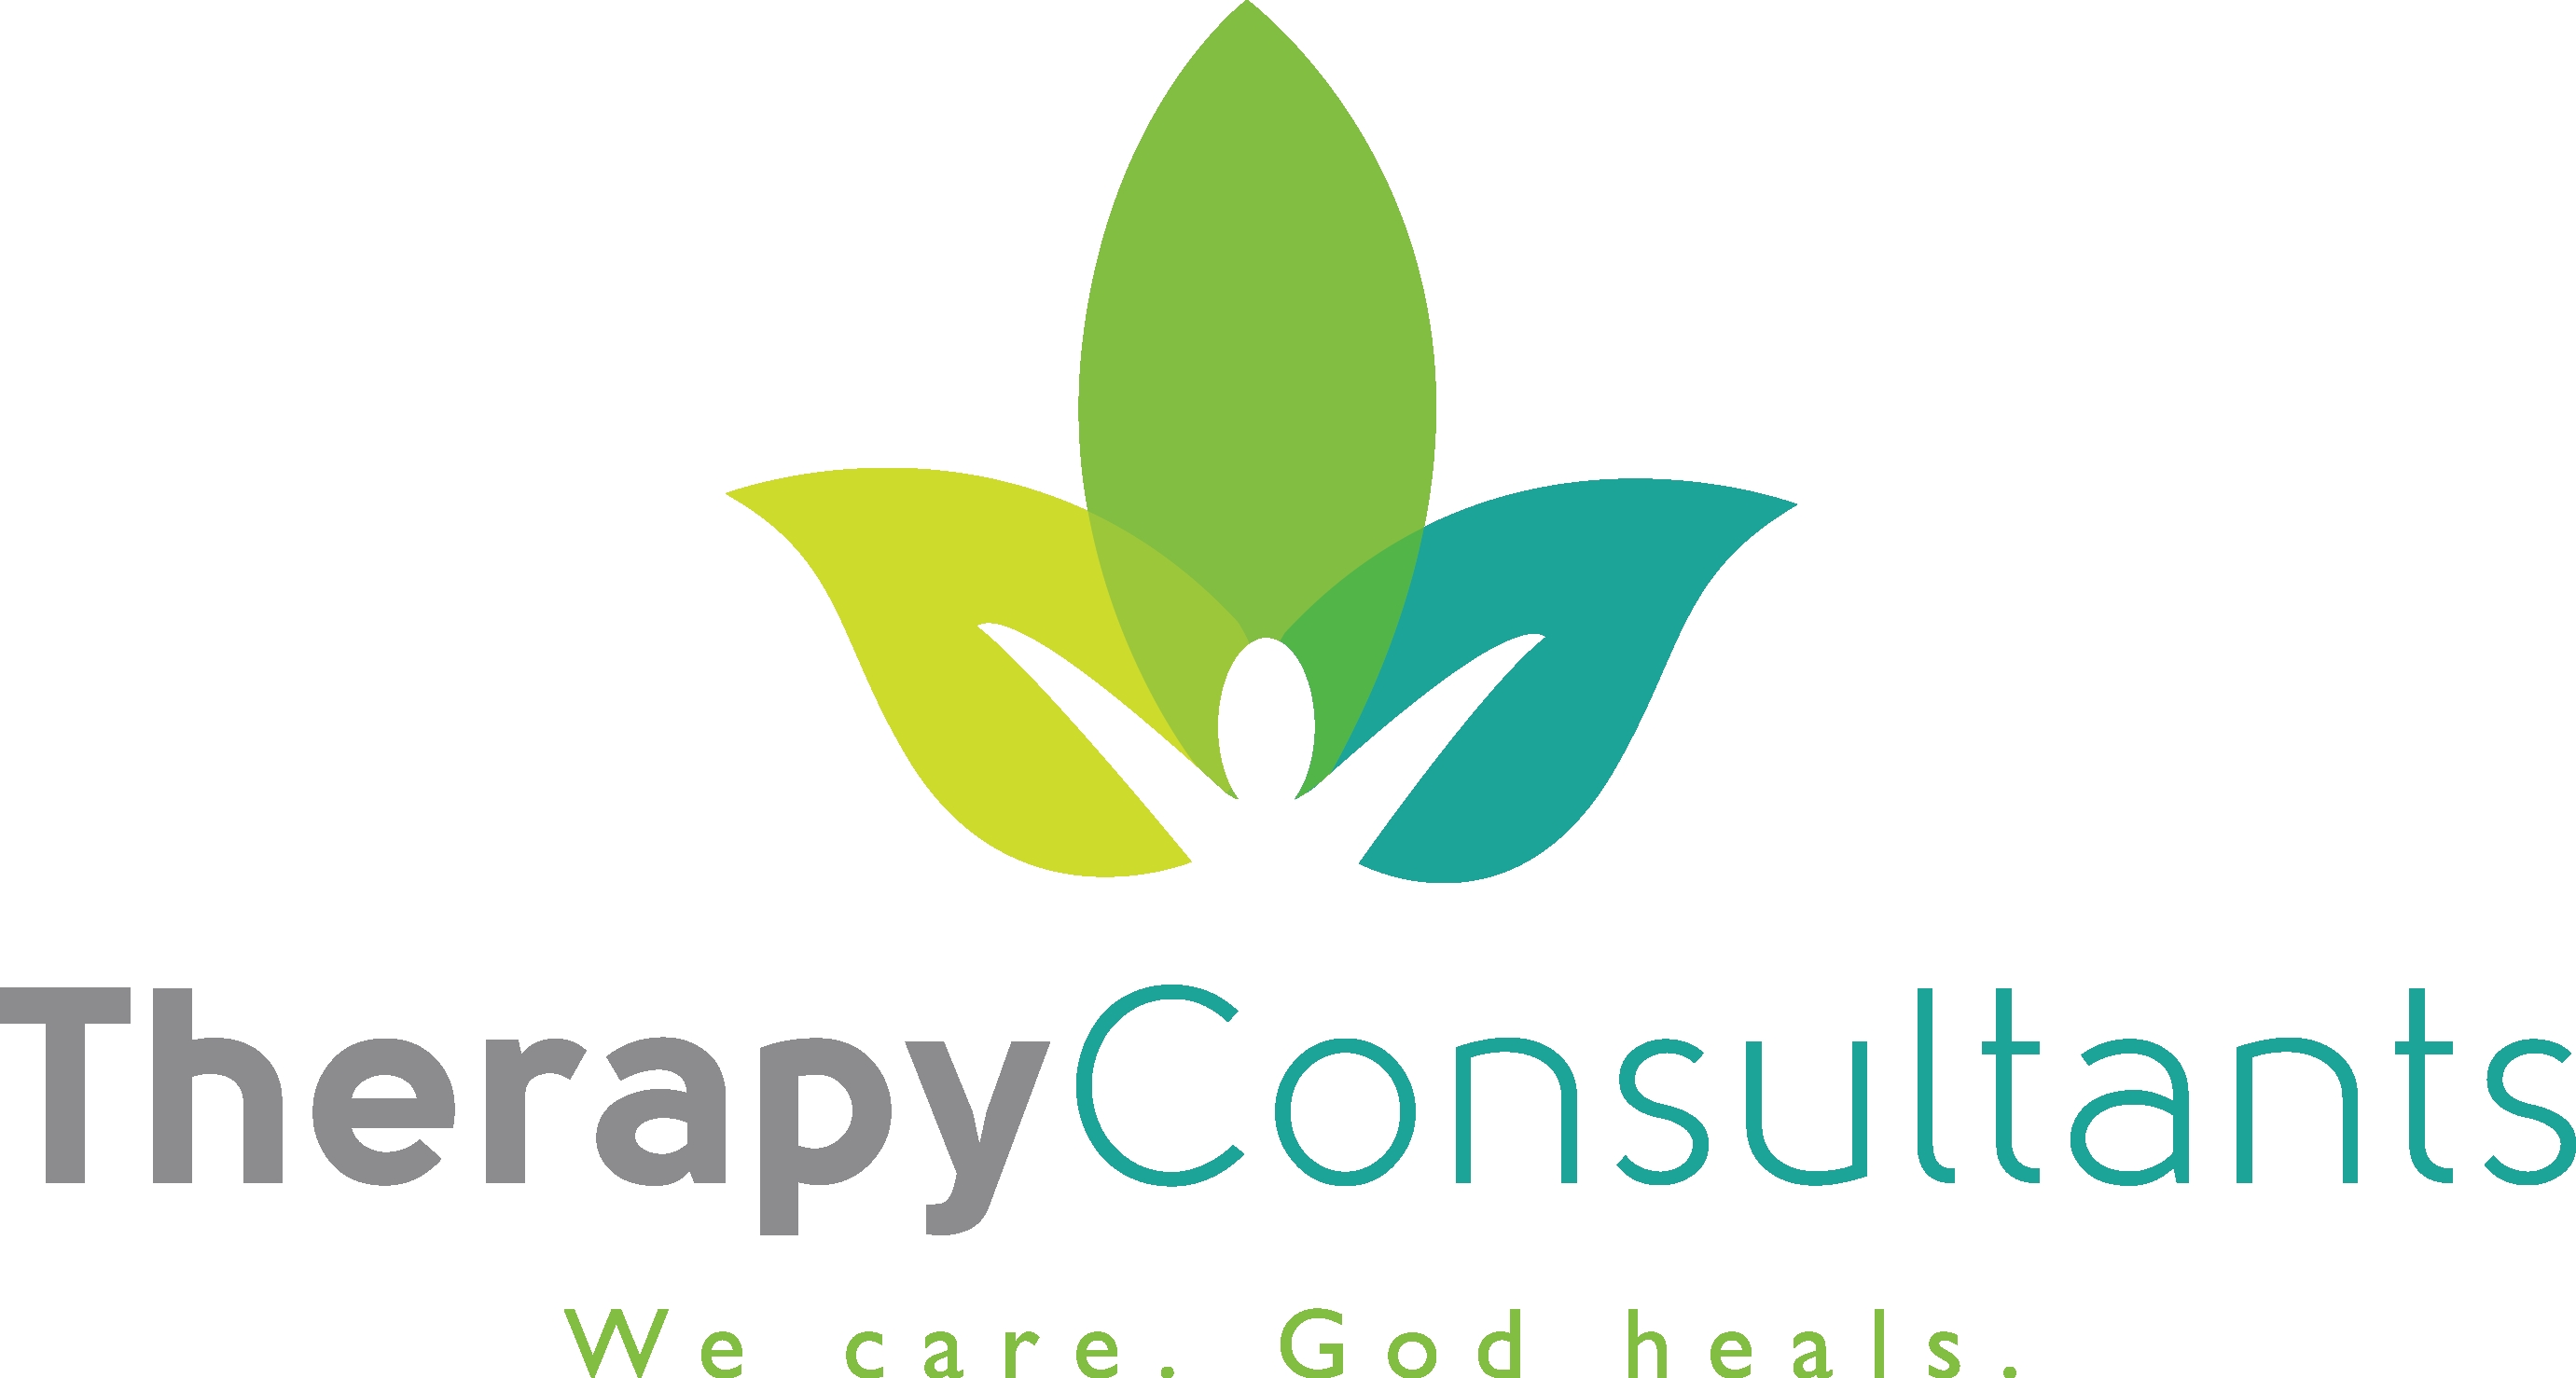 Therapy Consultants